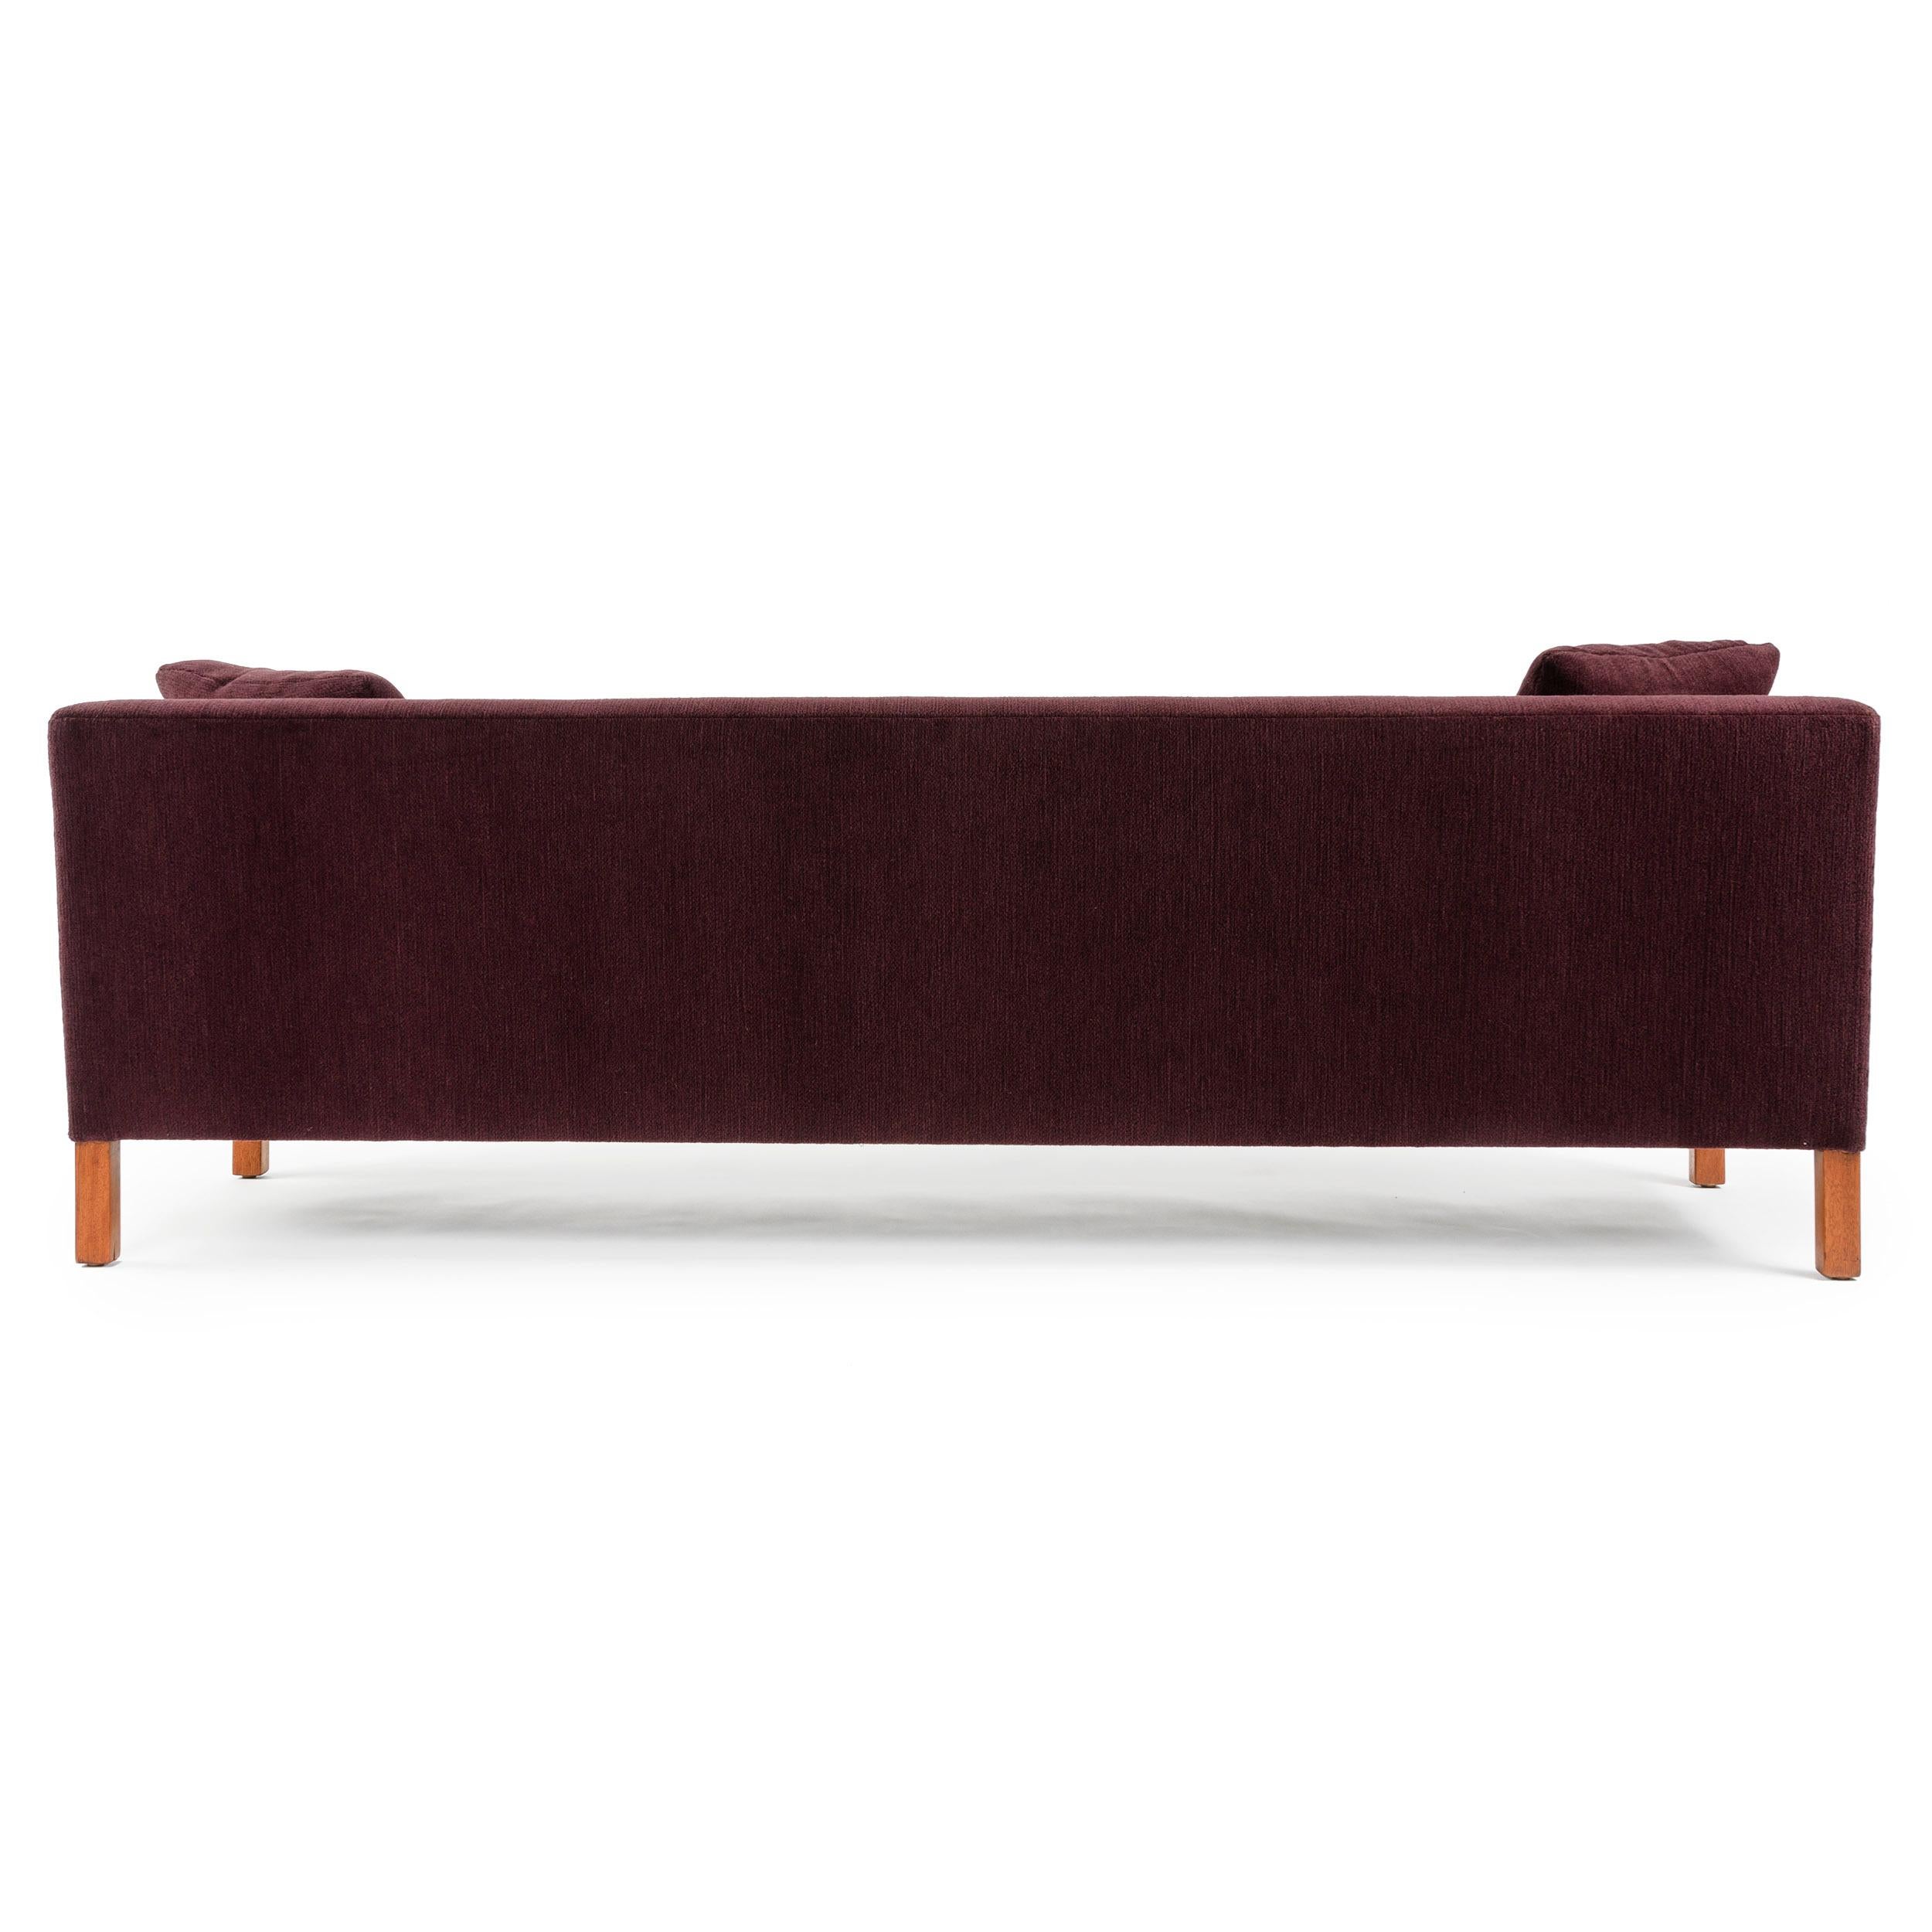 Mid-20th Century Upholstered Square Arm Sofa by Edward Wormley for Dunbar